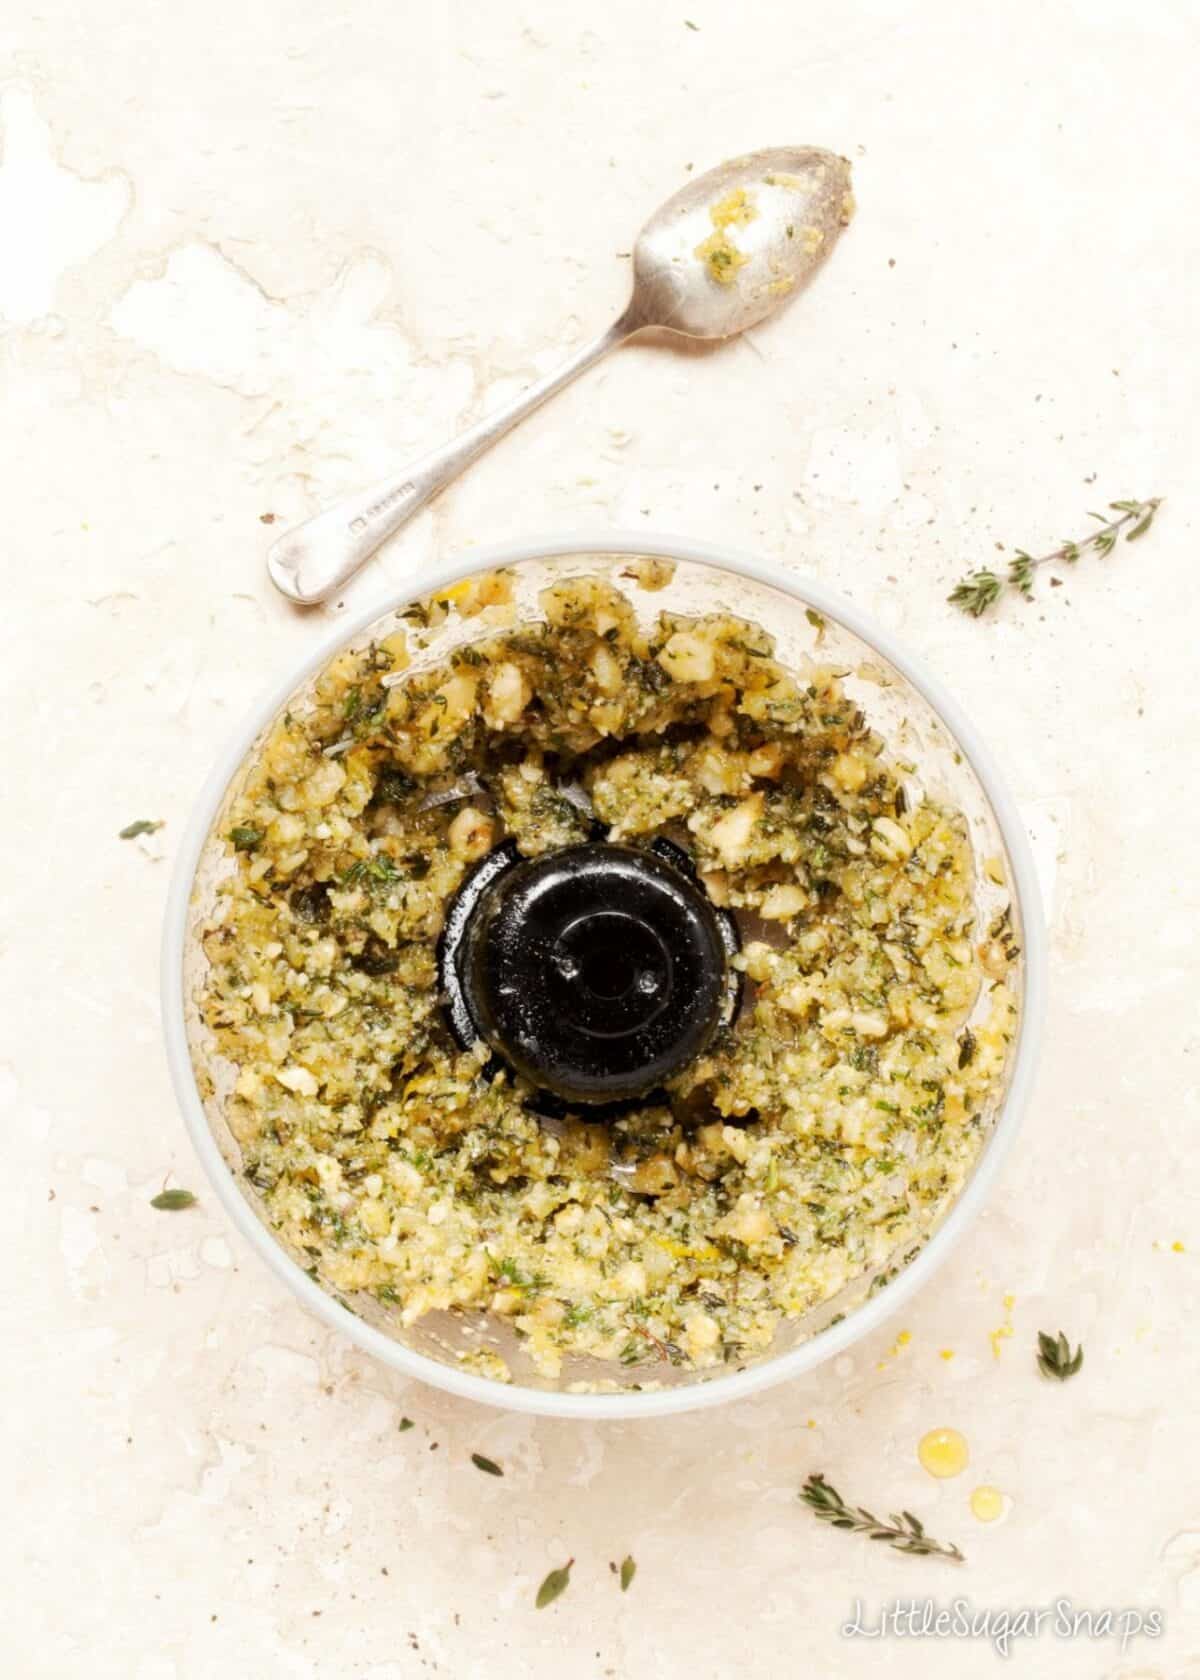 Hazelnut and thyme pesto freshly made in a food processor.